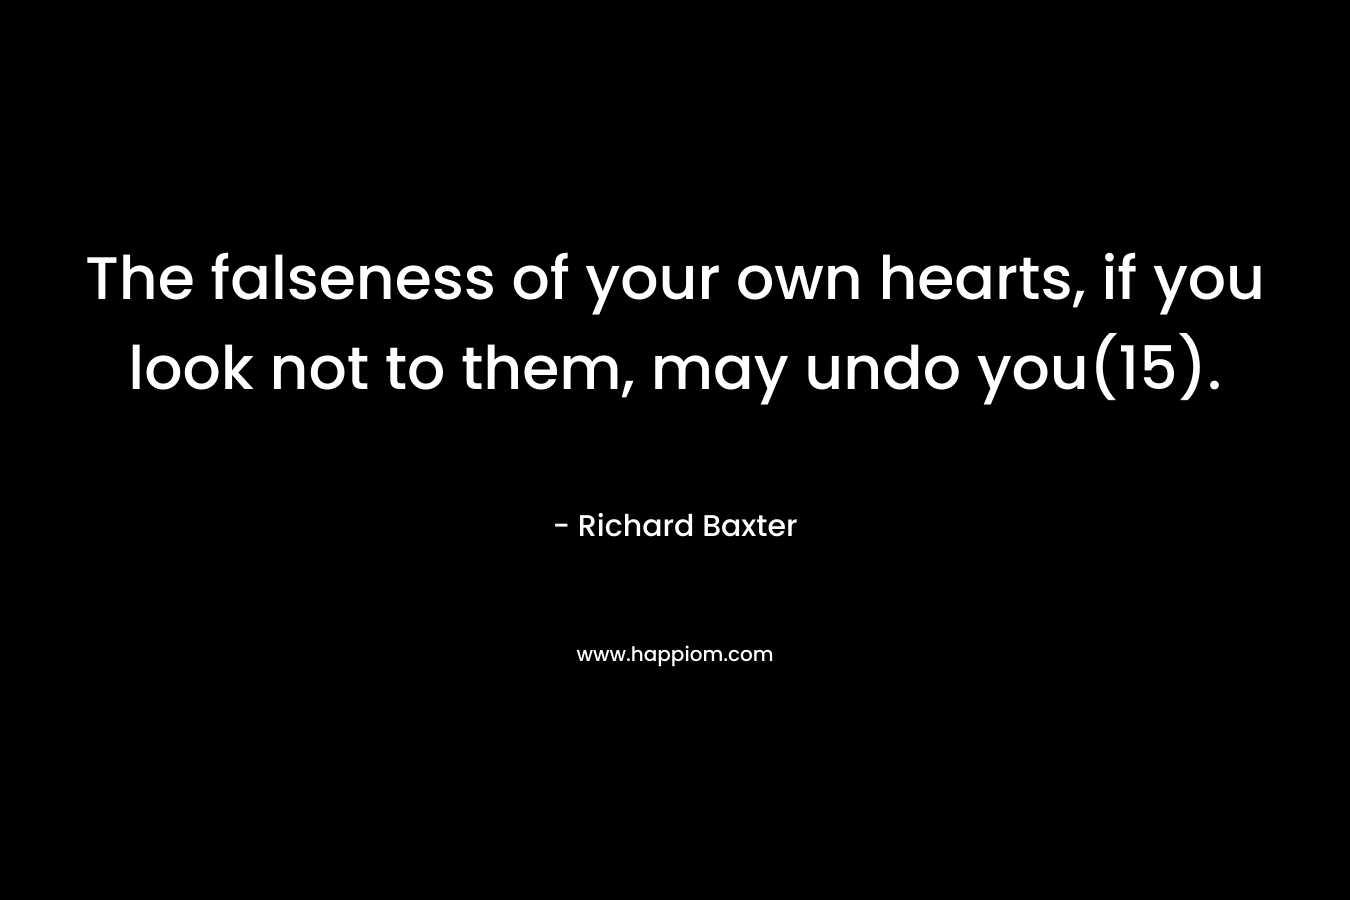 The falseness of your own hearts, if you look not to them, may undo you(15).